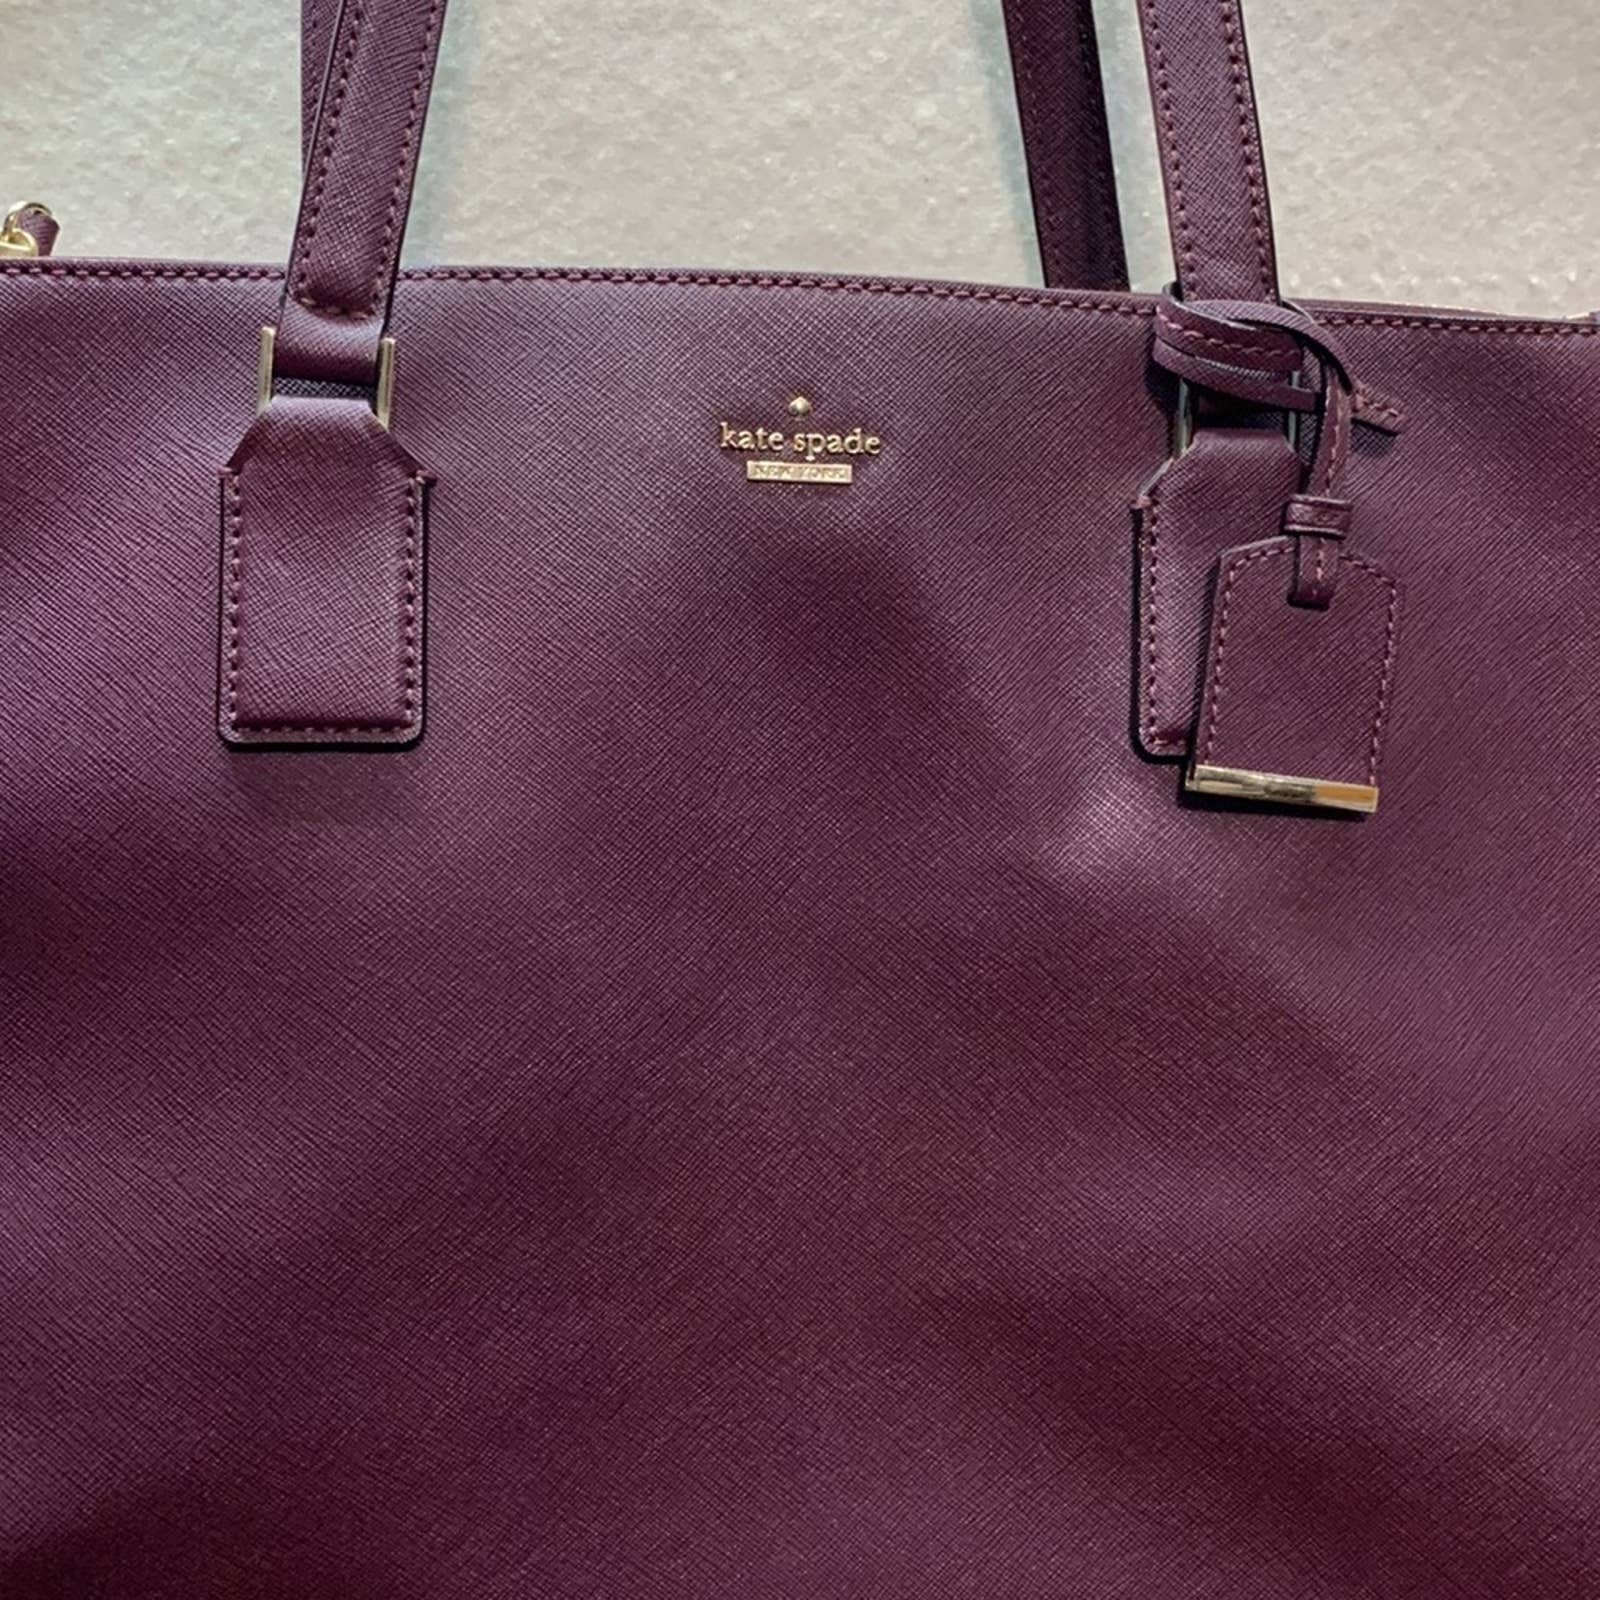 Kate Spade Large Compartment Berry Tote With Gold - Etsy